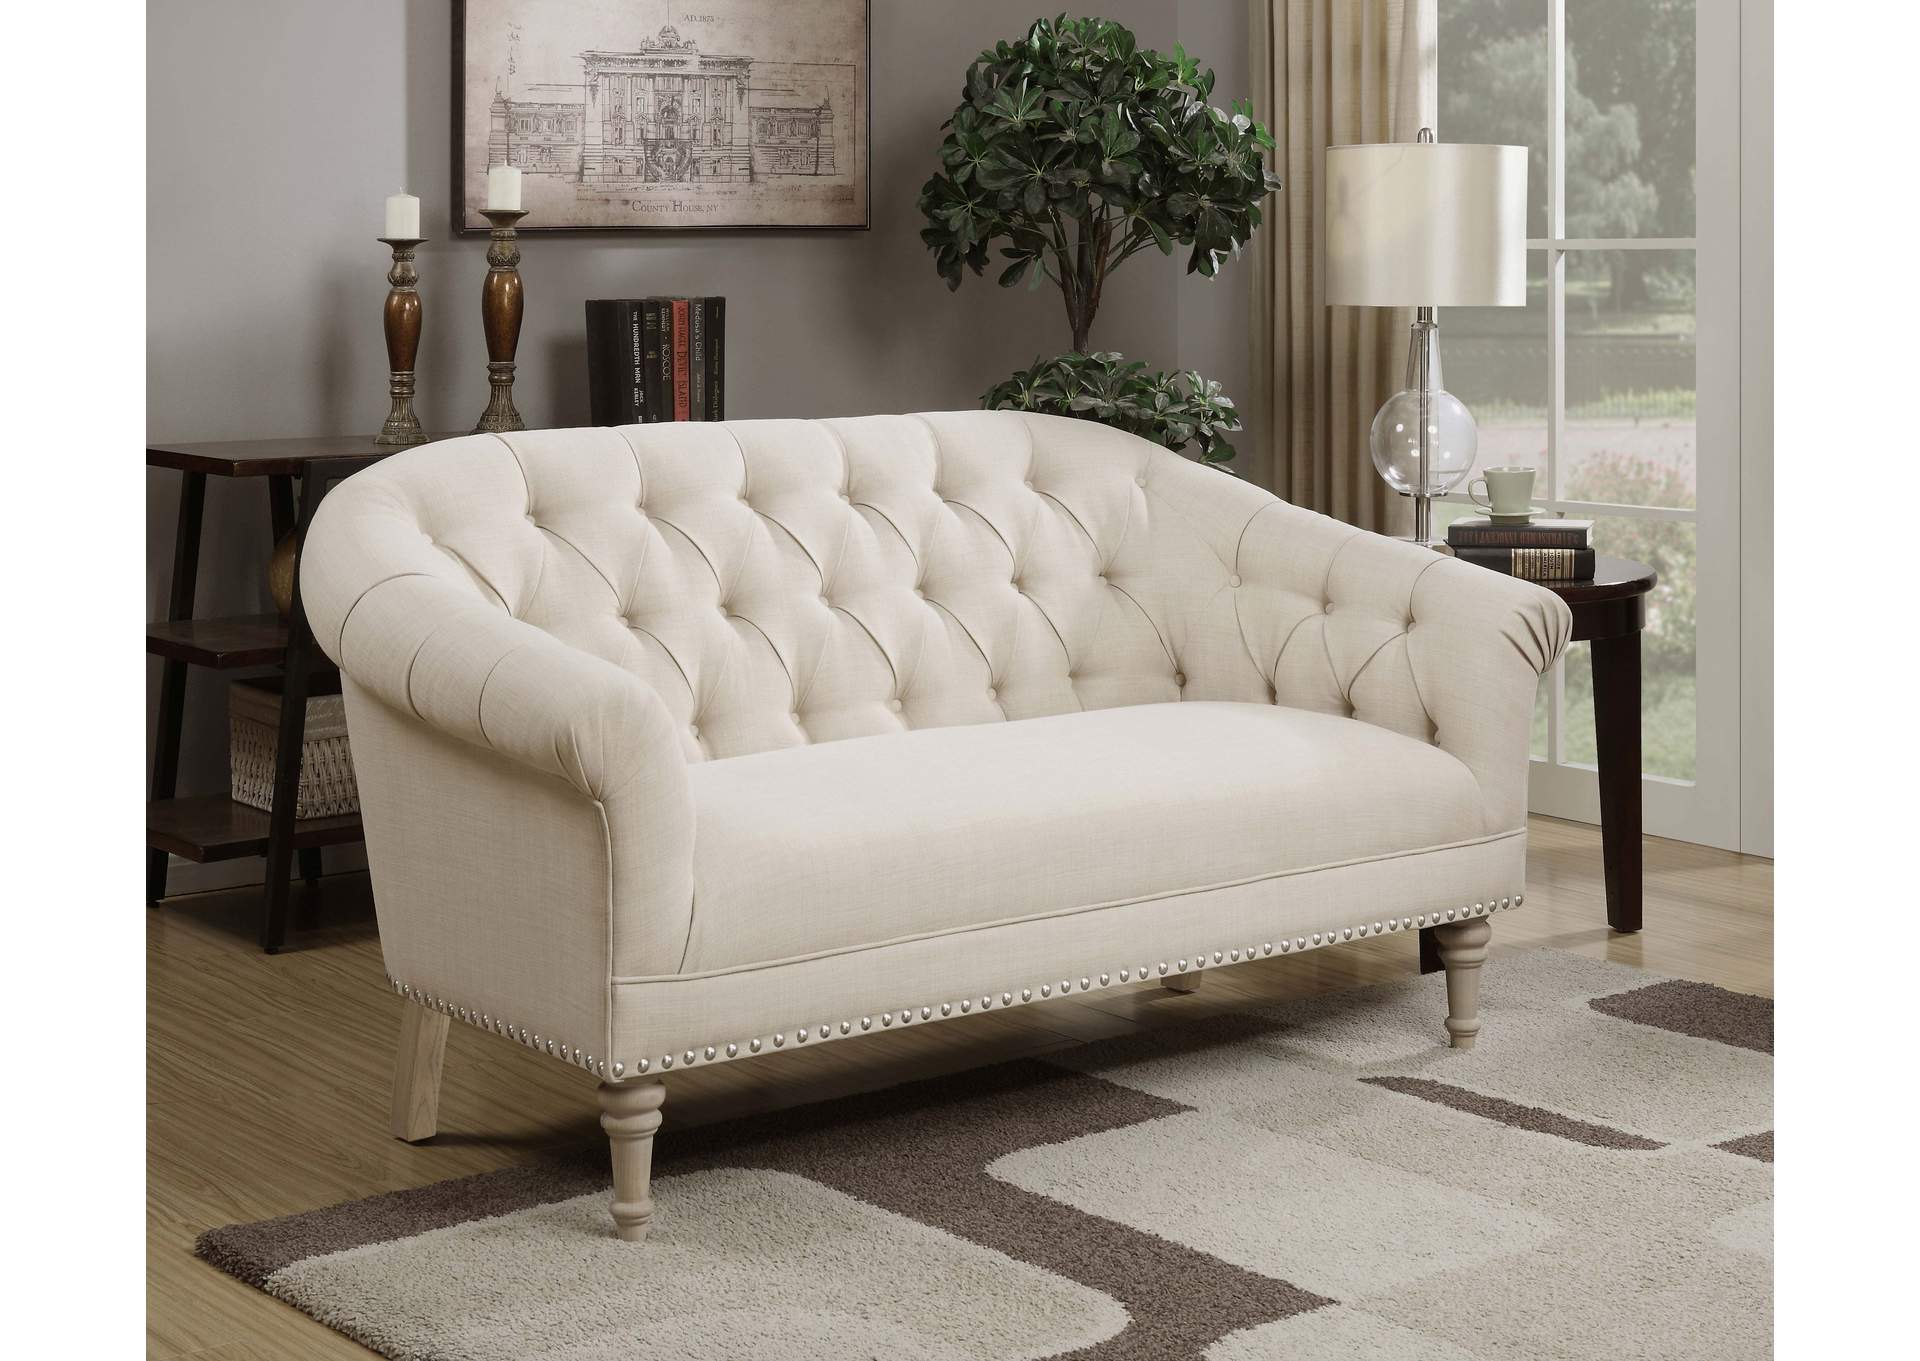 Billie Tufted Back Settee with Roll Arm Natural